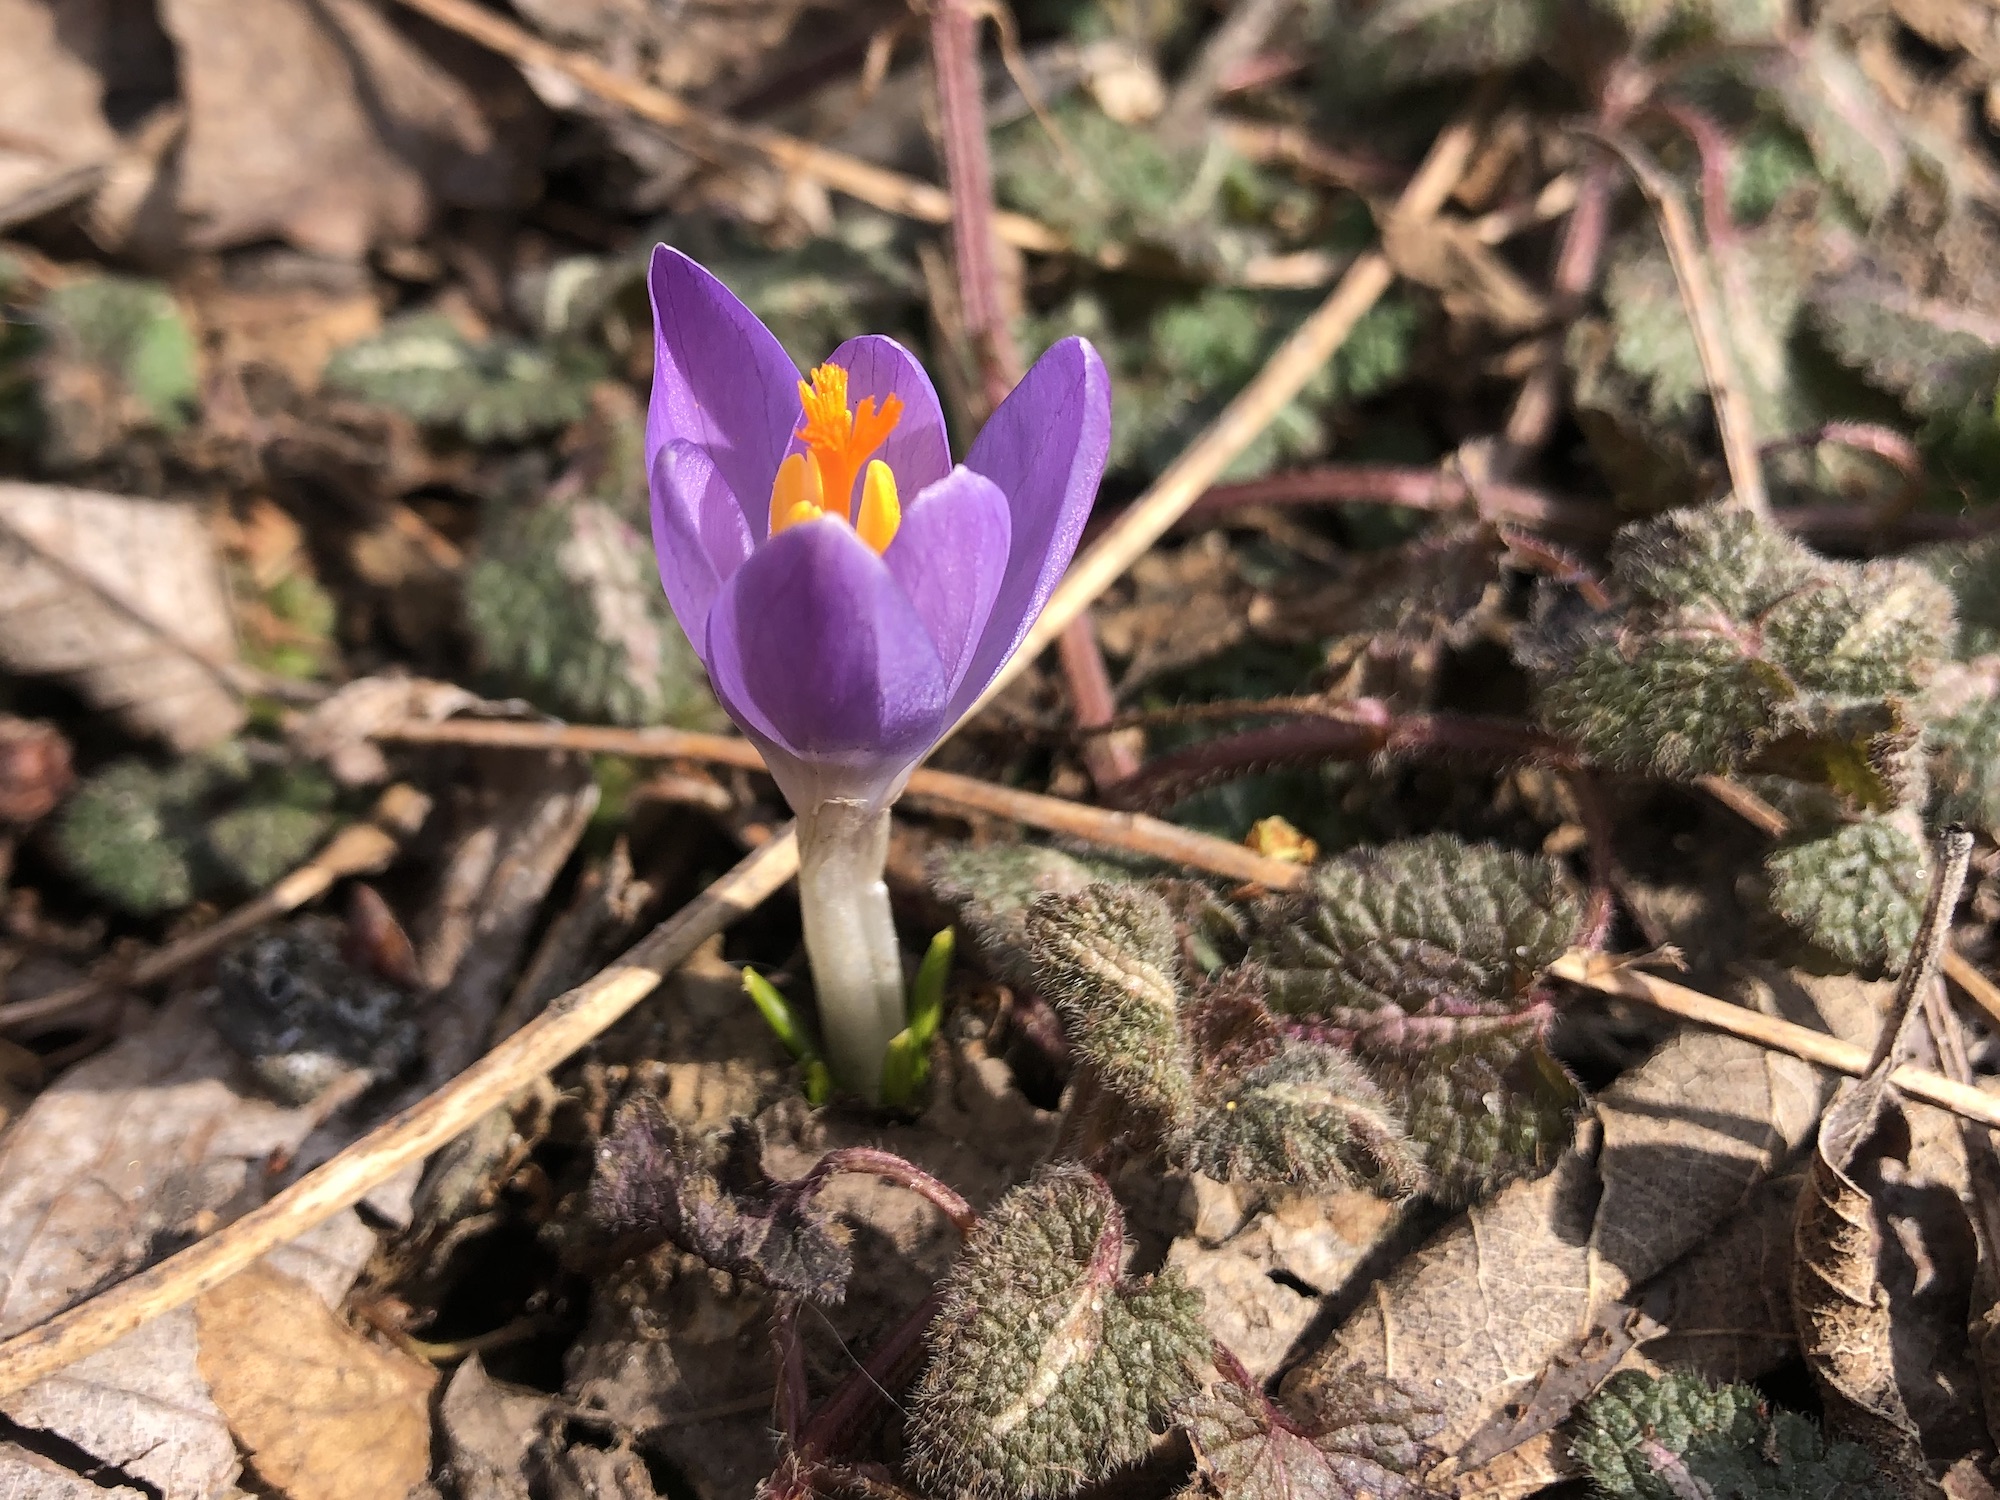 Crocus by Agawa Path in Madison, Wisconsin on March 21, 2023.